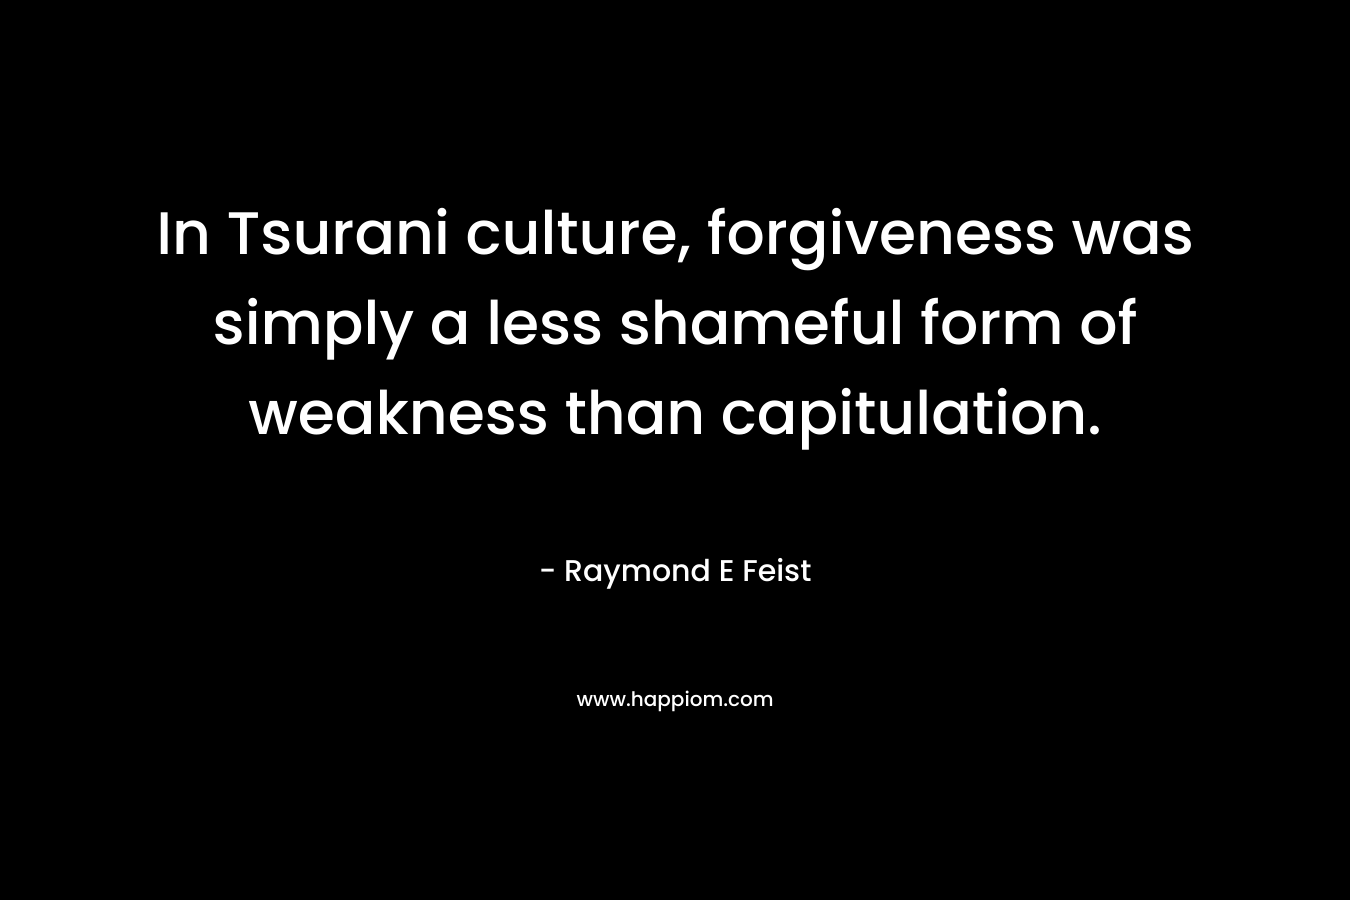 In Tsurani culture, forgiveness was simply a less shameful form of weakness than capitulation.